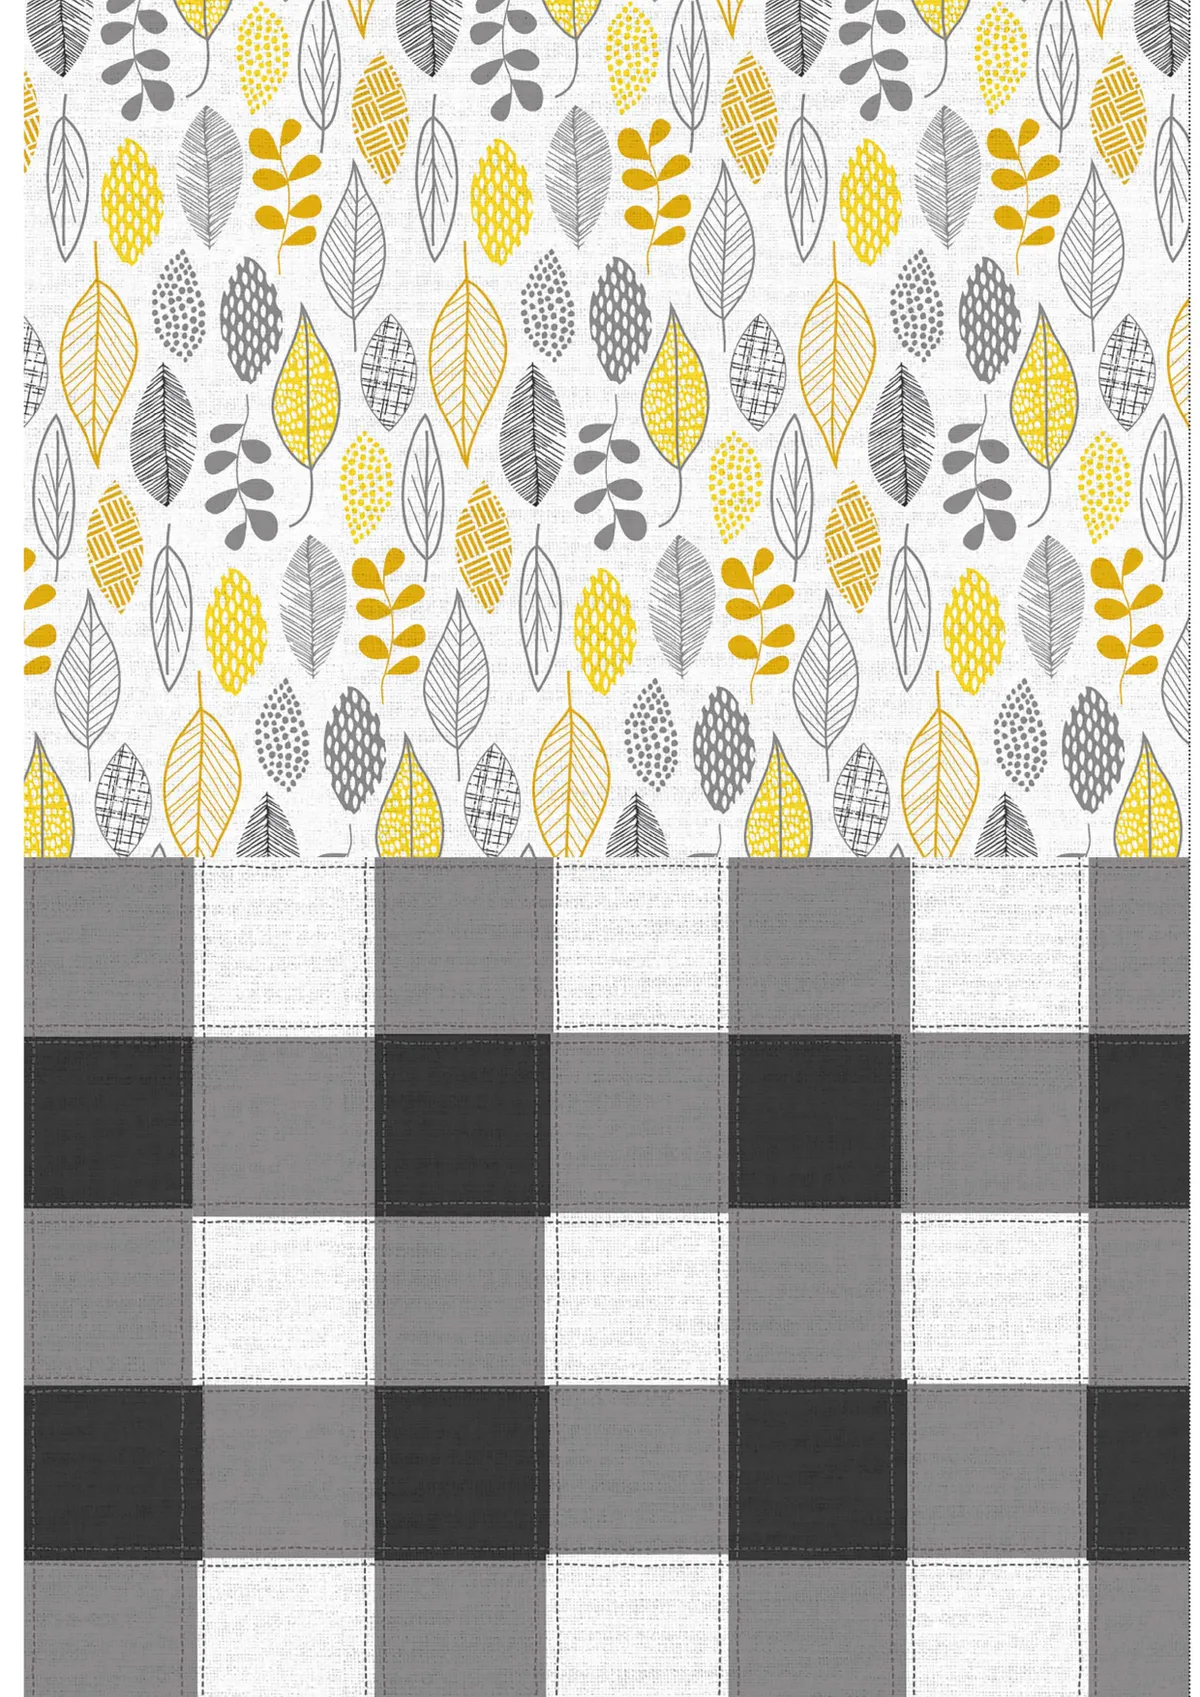 Free yellow and black fabric patterned papers_03